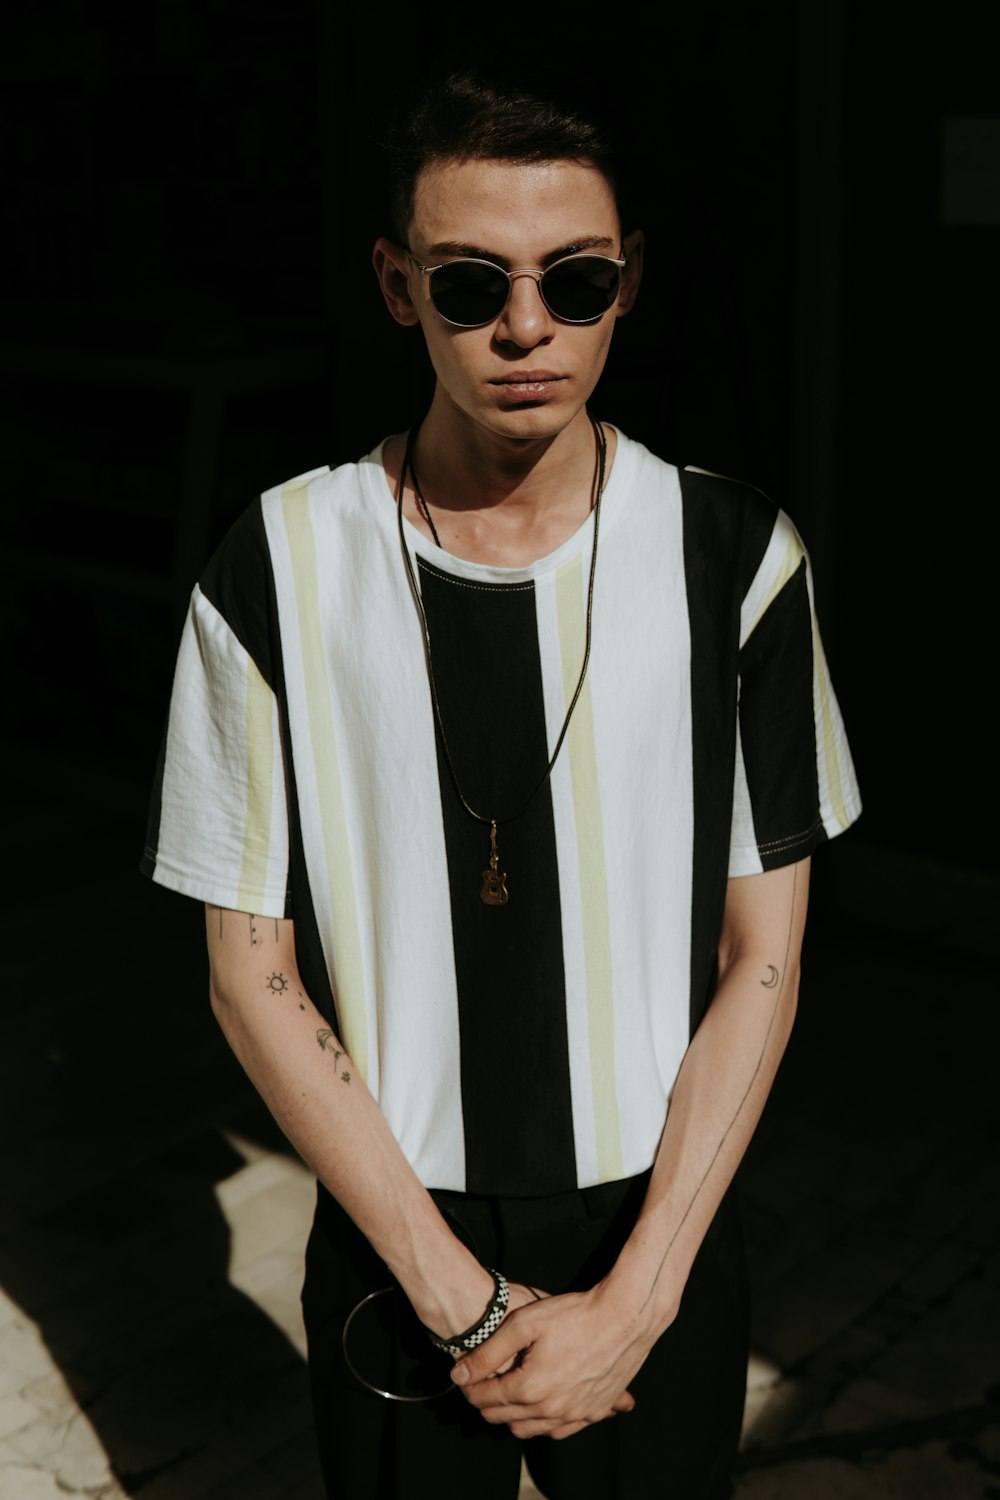 a man wearing sunglasses and a striped shirt